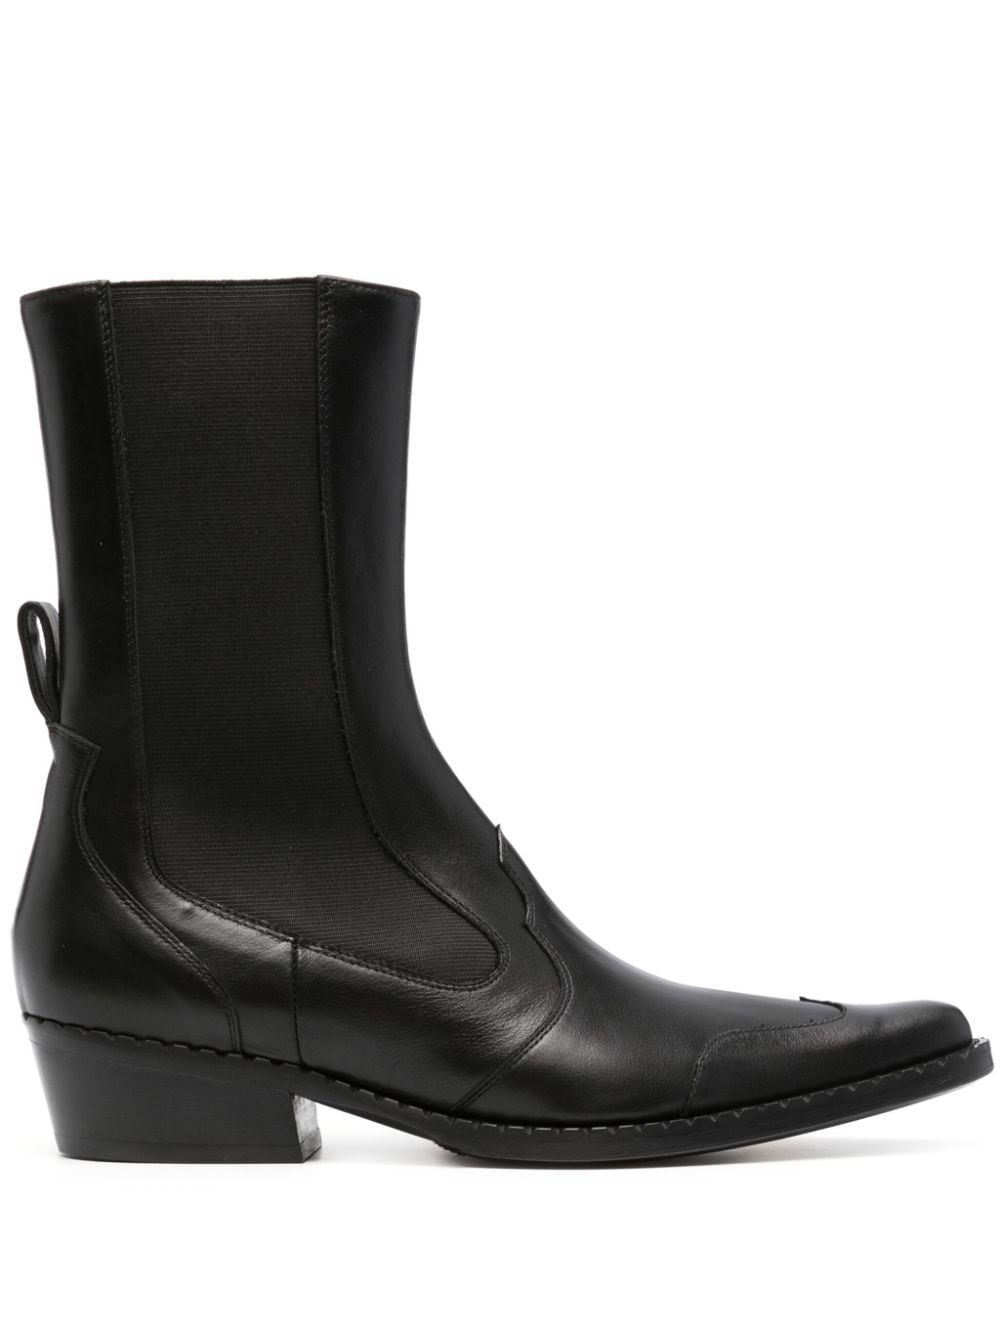 BY FAR Otis 40mm leather boots - Black